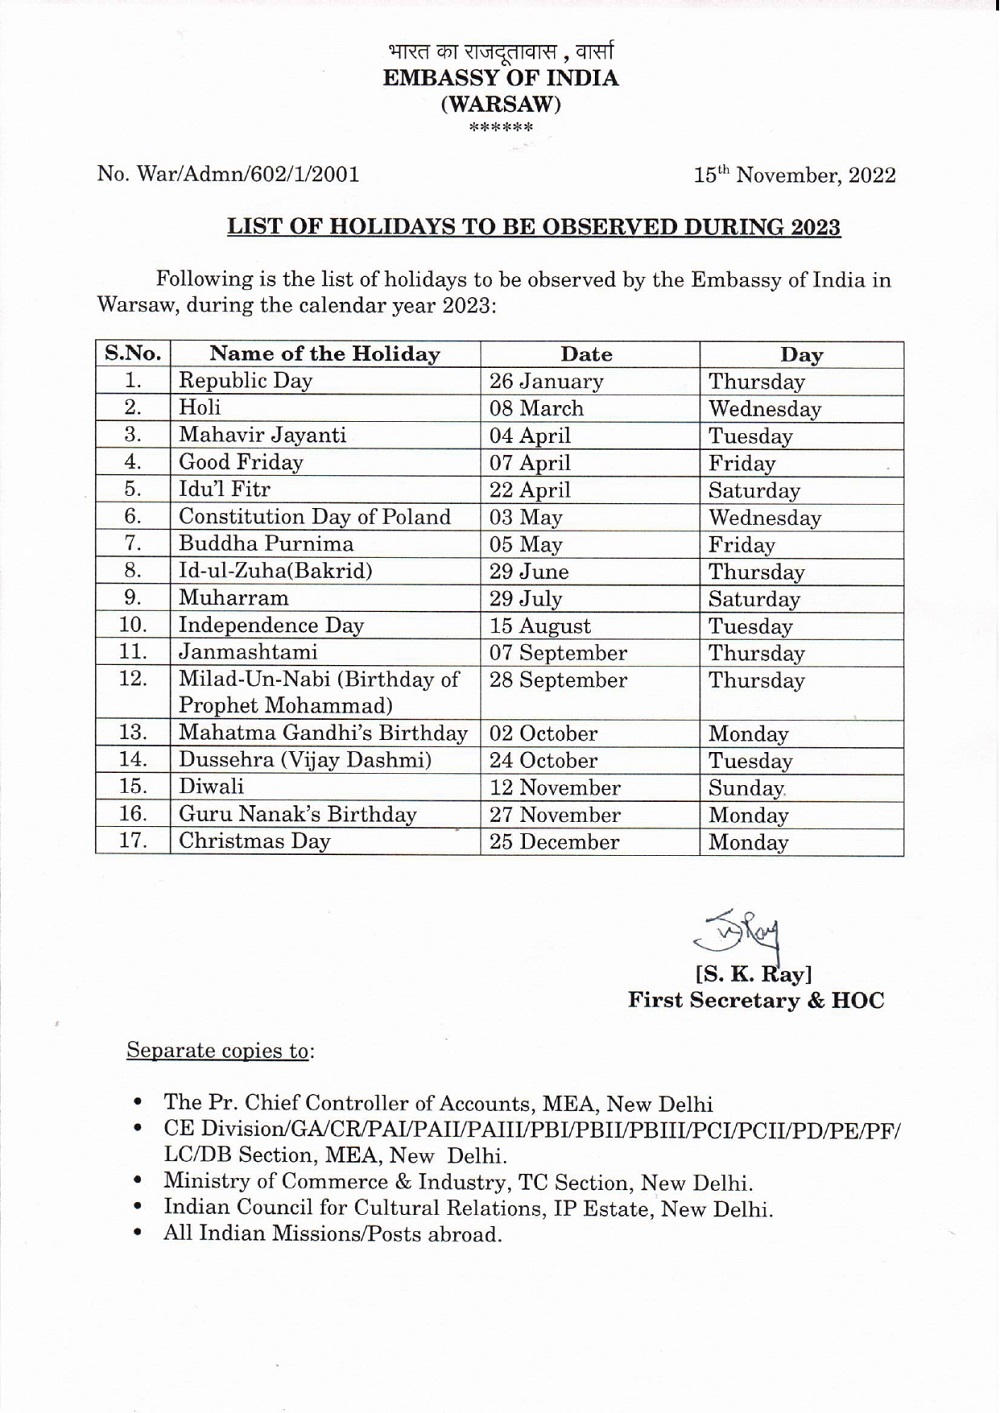 Embassy of India, Poland & Lithuania List of Holidays